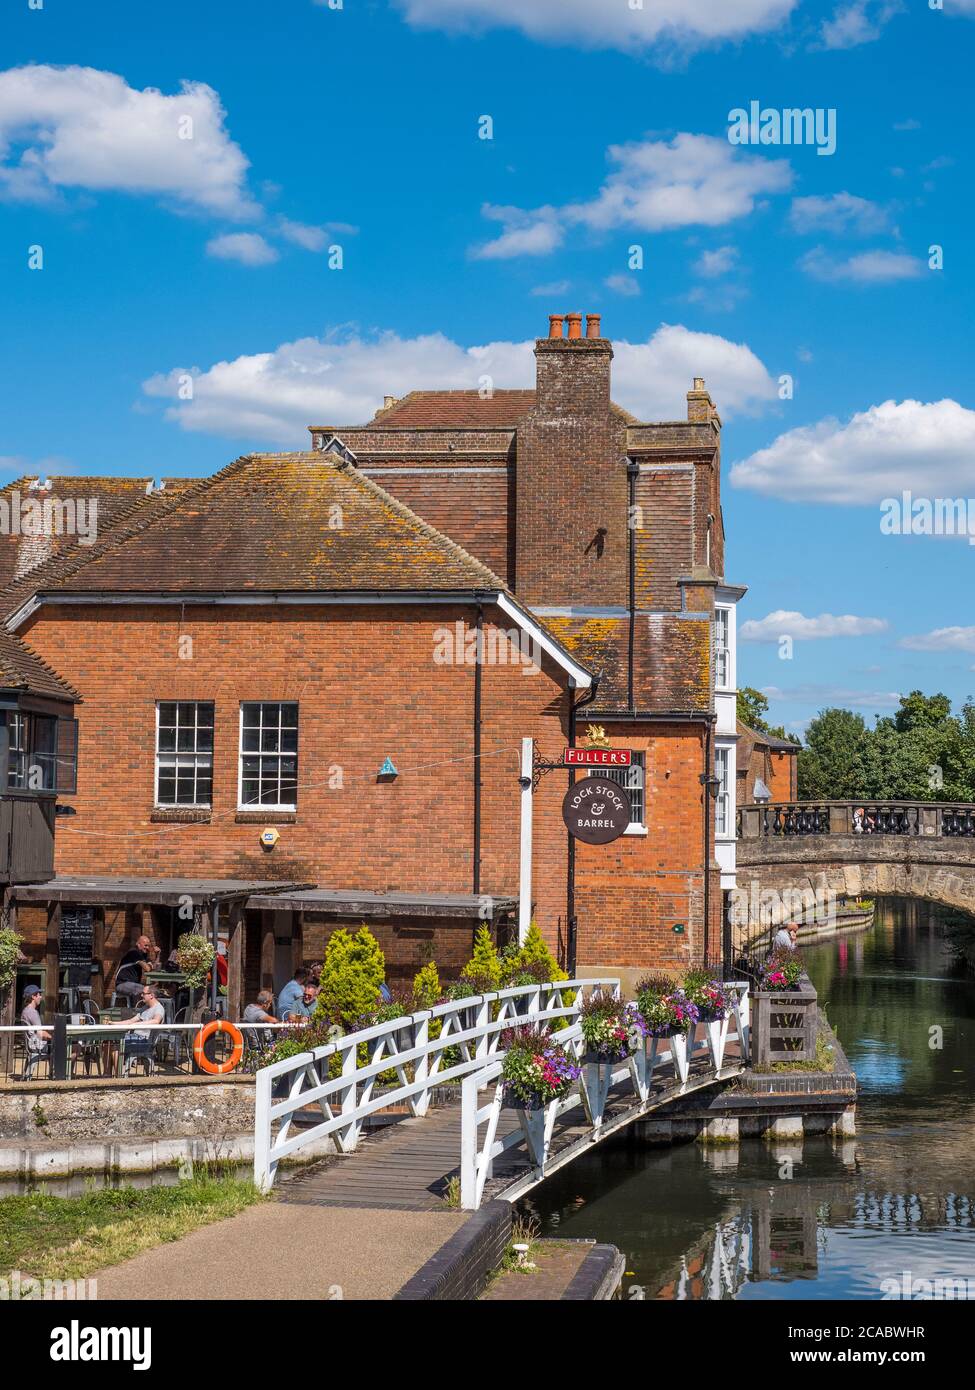 The Lock stock & Barrel, Newbury on the River Kennett, Central Newbury, Berkshire, Angleterre, Royaume-Uni, GB. Banque D'Images